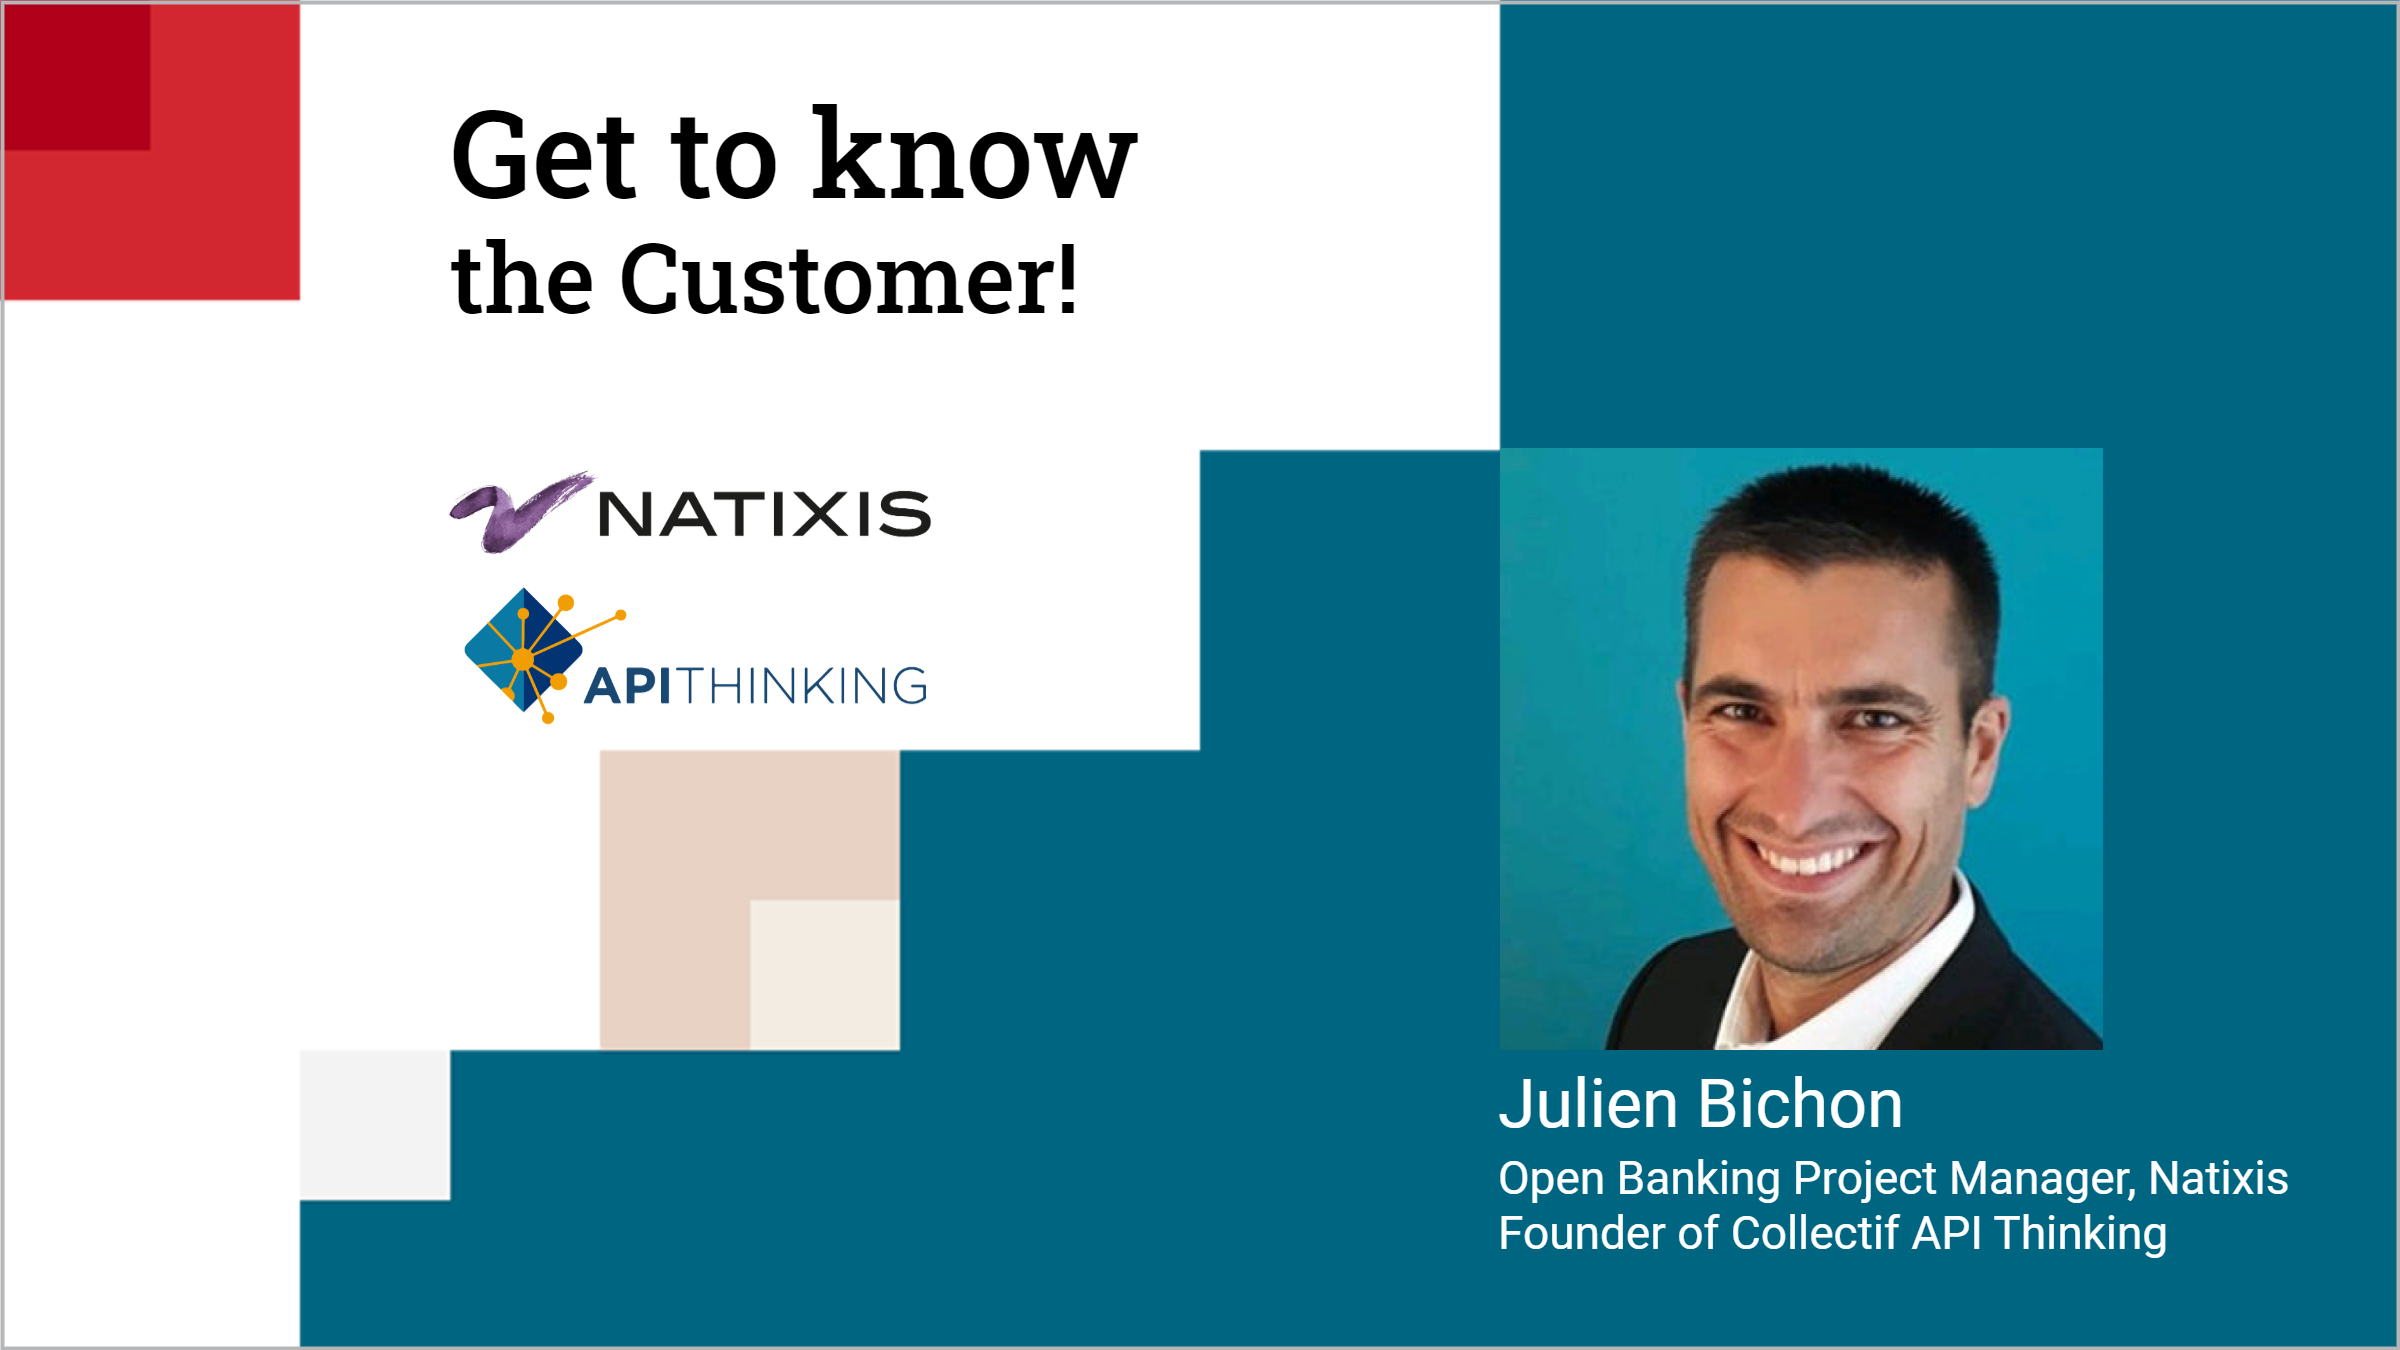 Get to know the customer: Meet Julien Bichon of Natixis